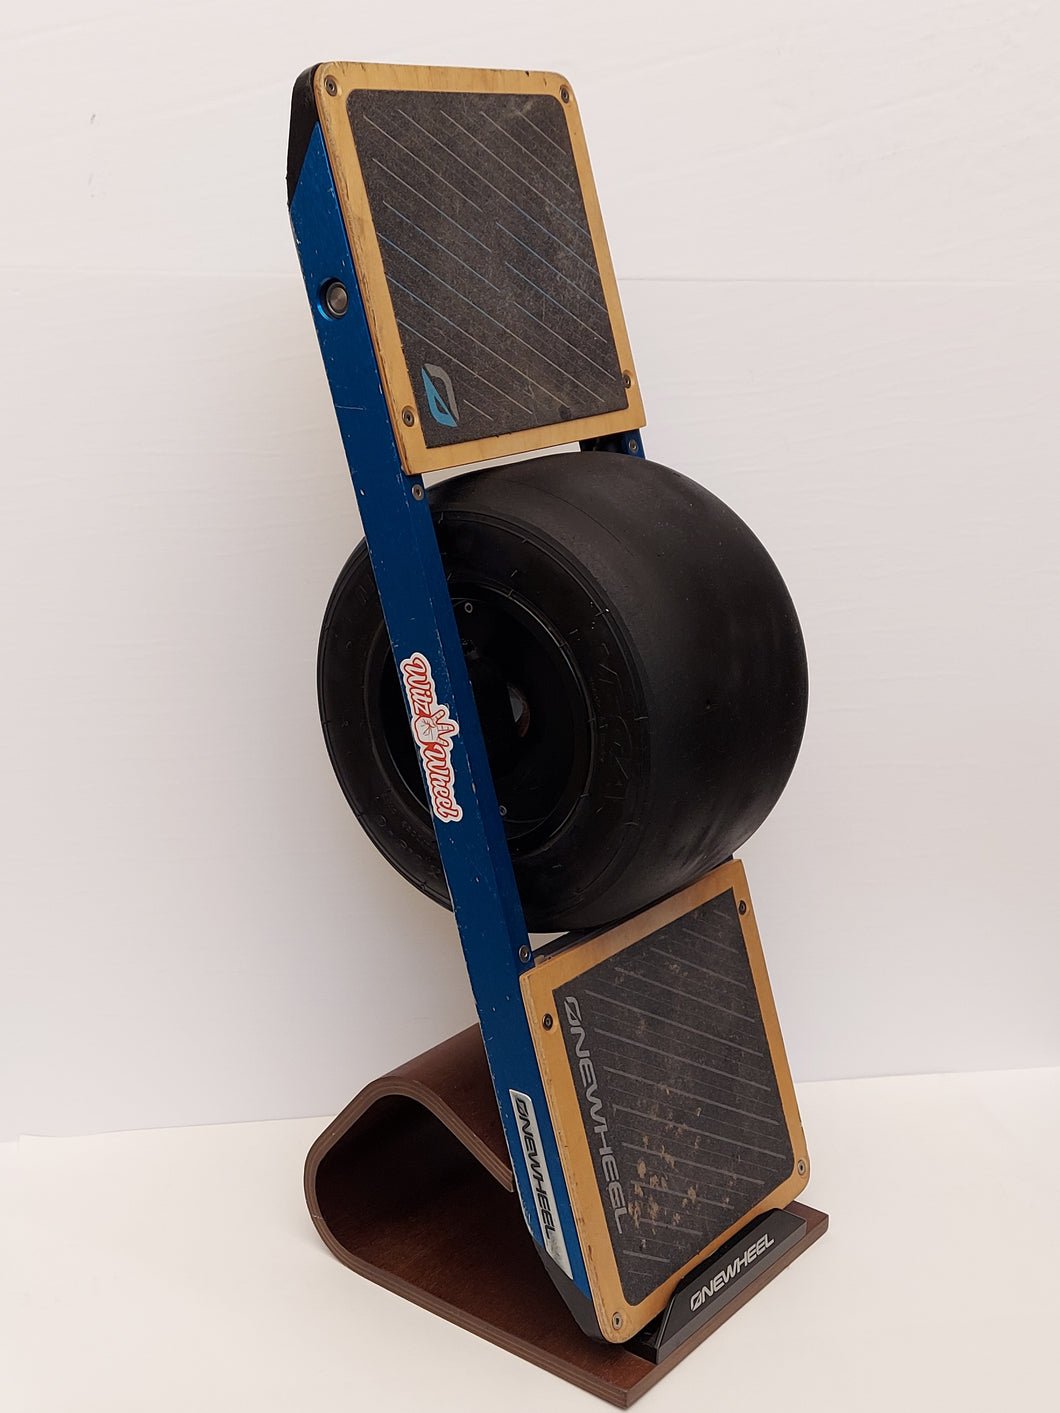 Own a piece of Onewheel history with this mint Onewheel Version1 w/ only 200 miles!  #76